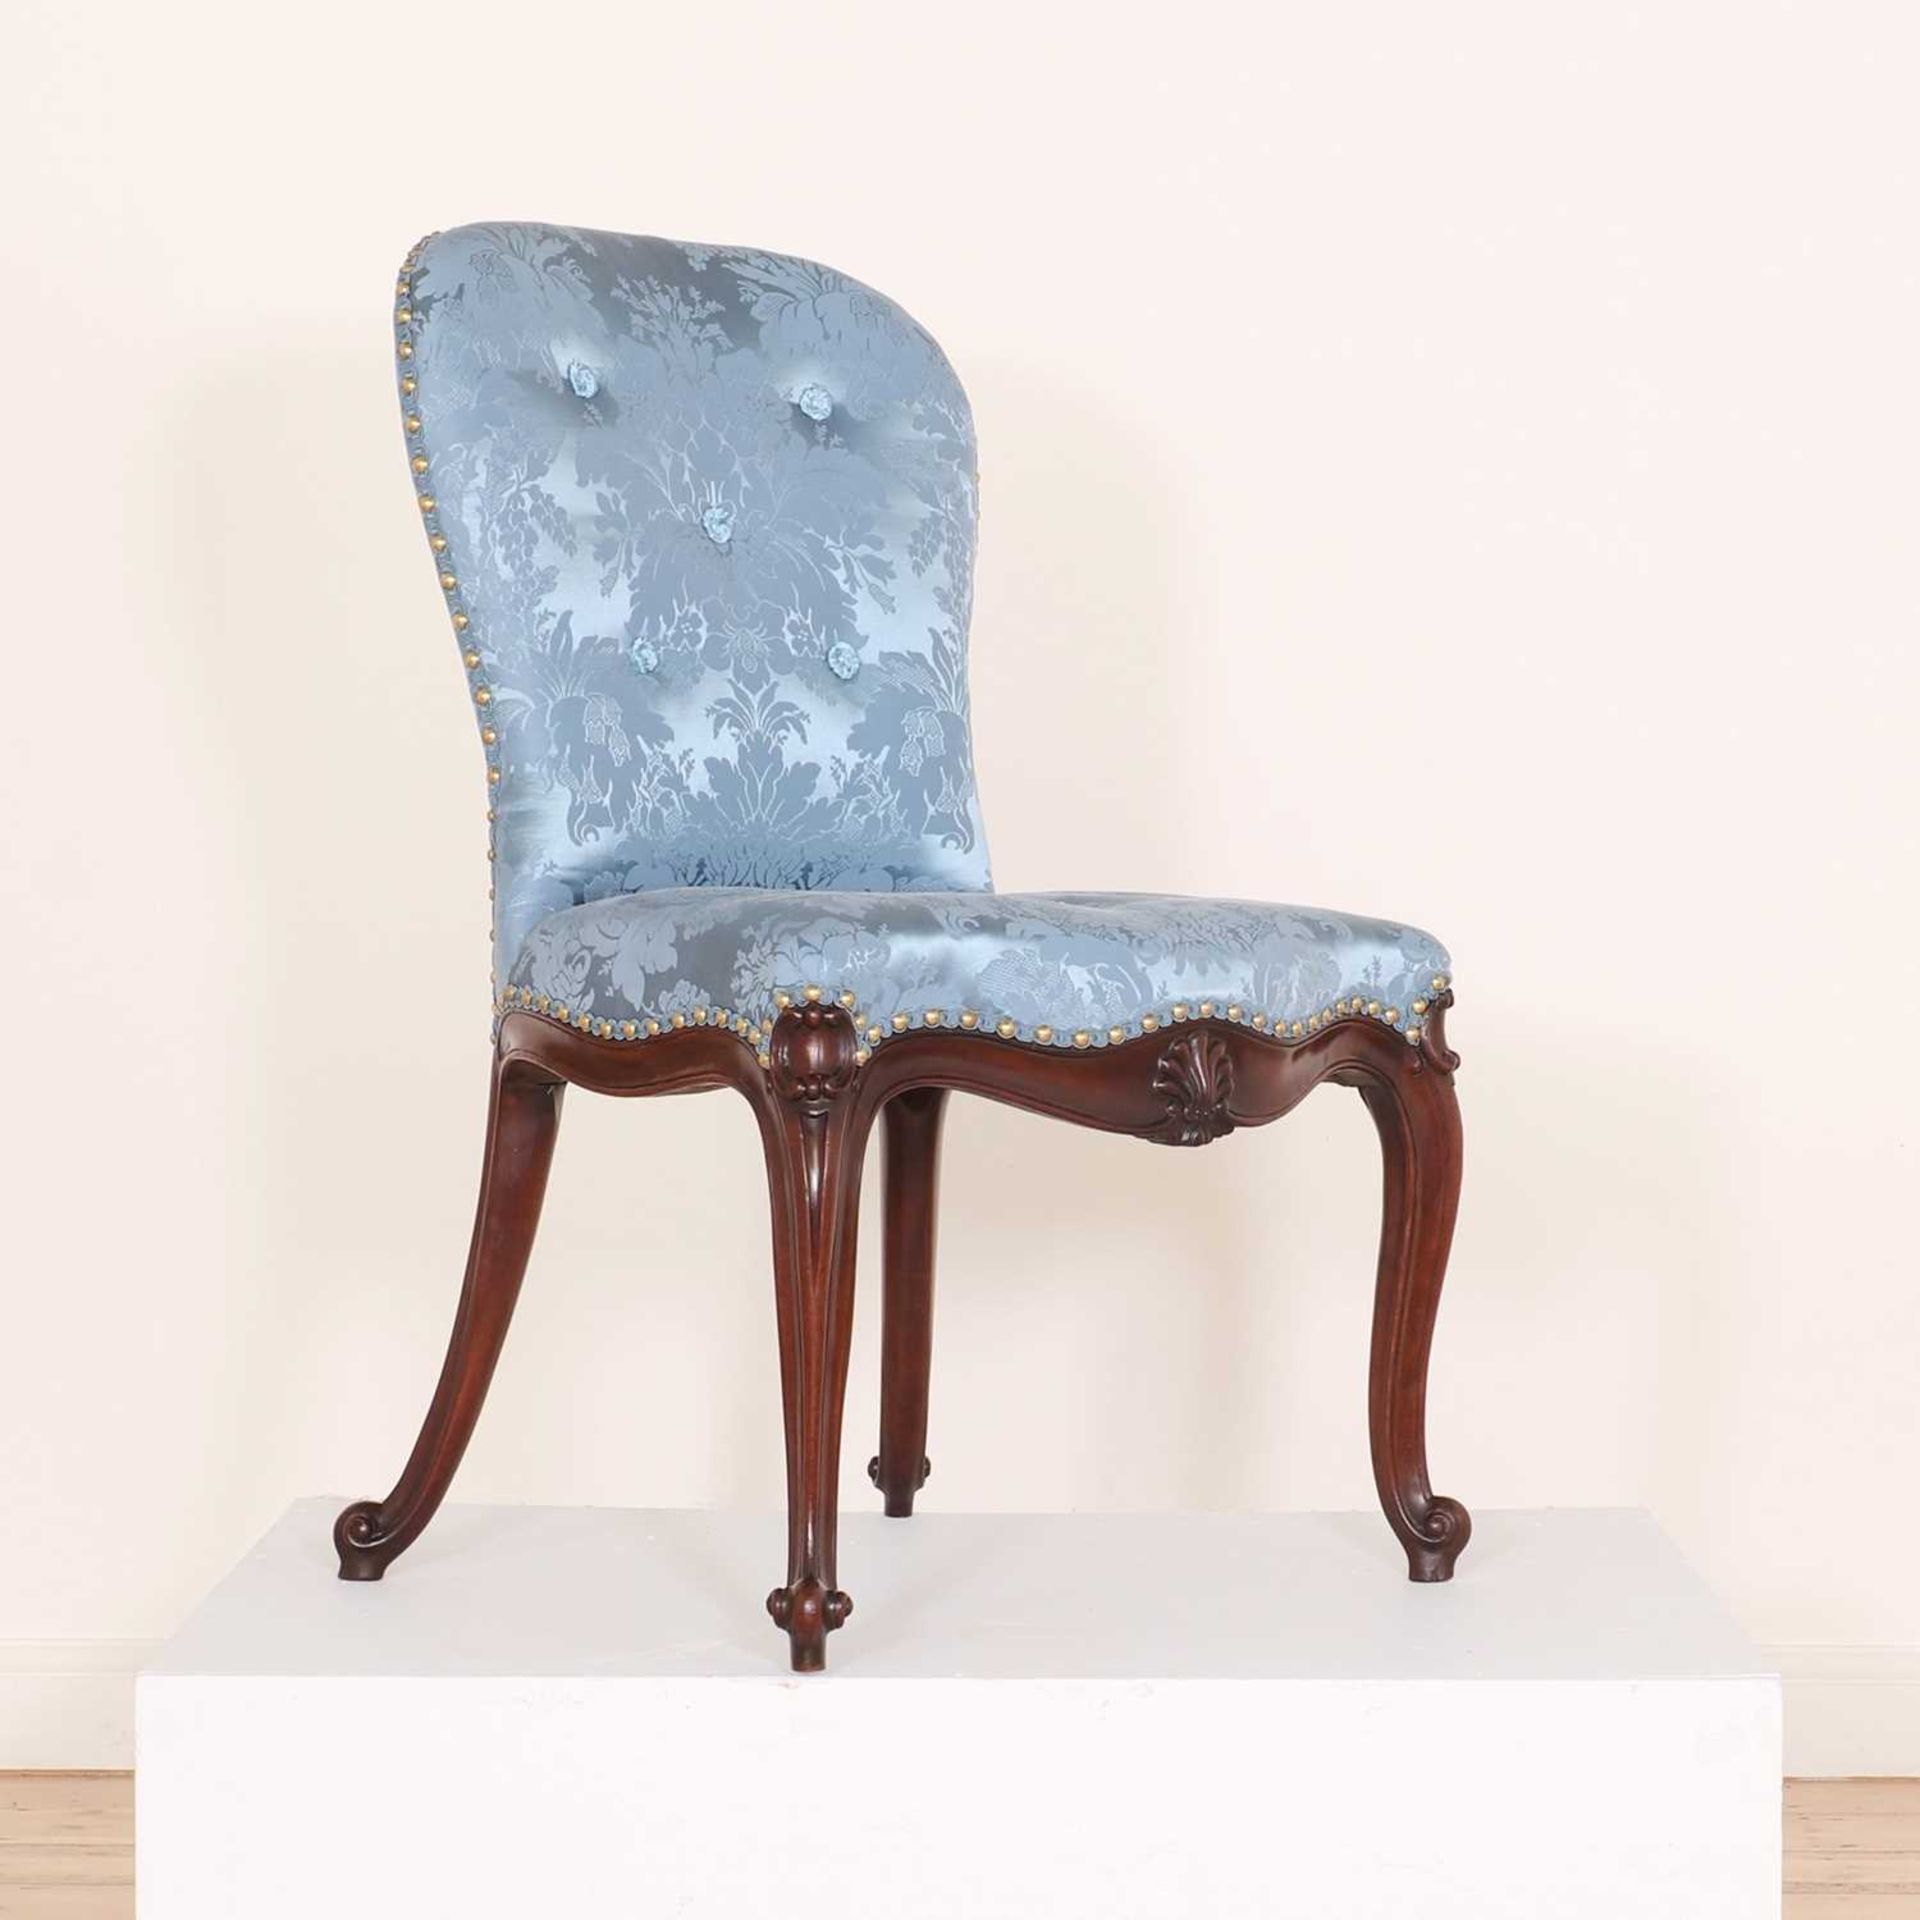 A George III mahogany side chair attributed to Thomas Chippendale